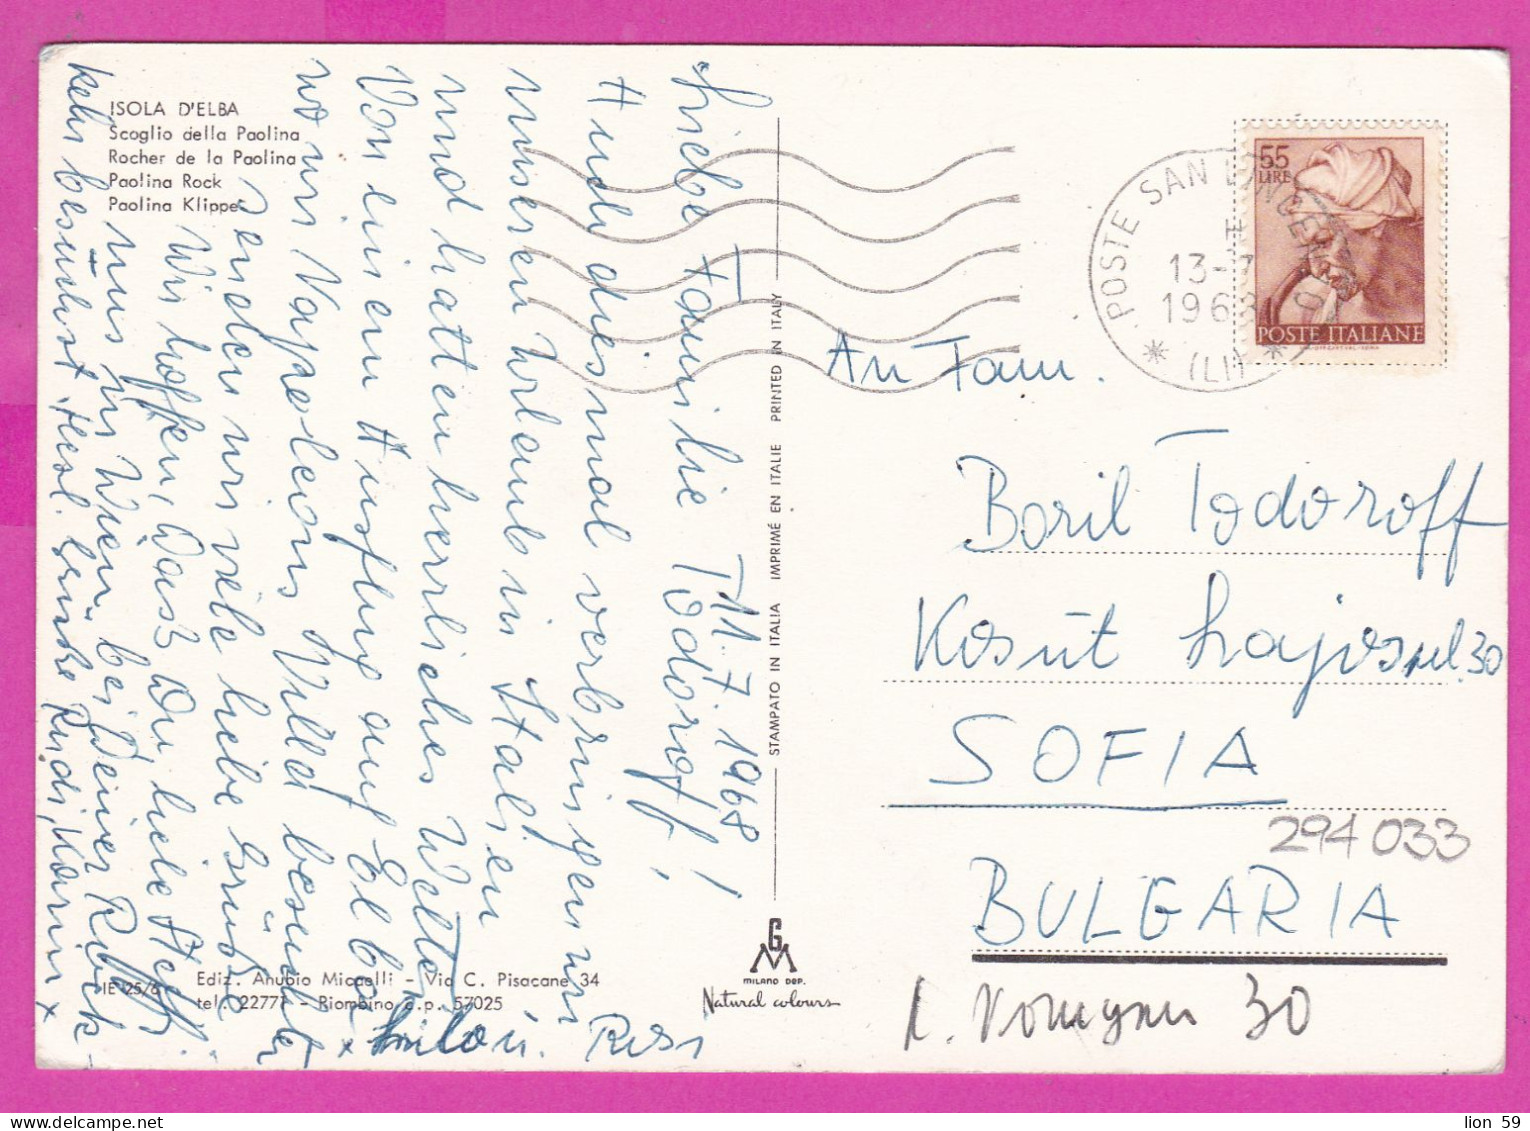 294033 / Italy - Isola D'Elba Paolina Rock PC 1968 San Vincenzo USED 55 L Designs From Sistine Chapel By Michelangelo - 1961-70: Poststempel